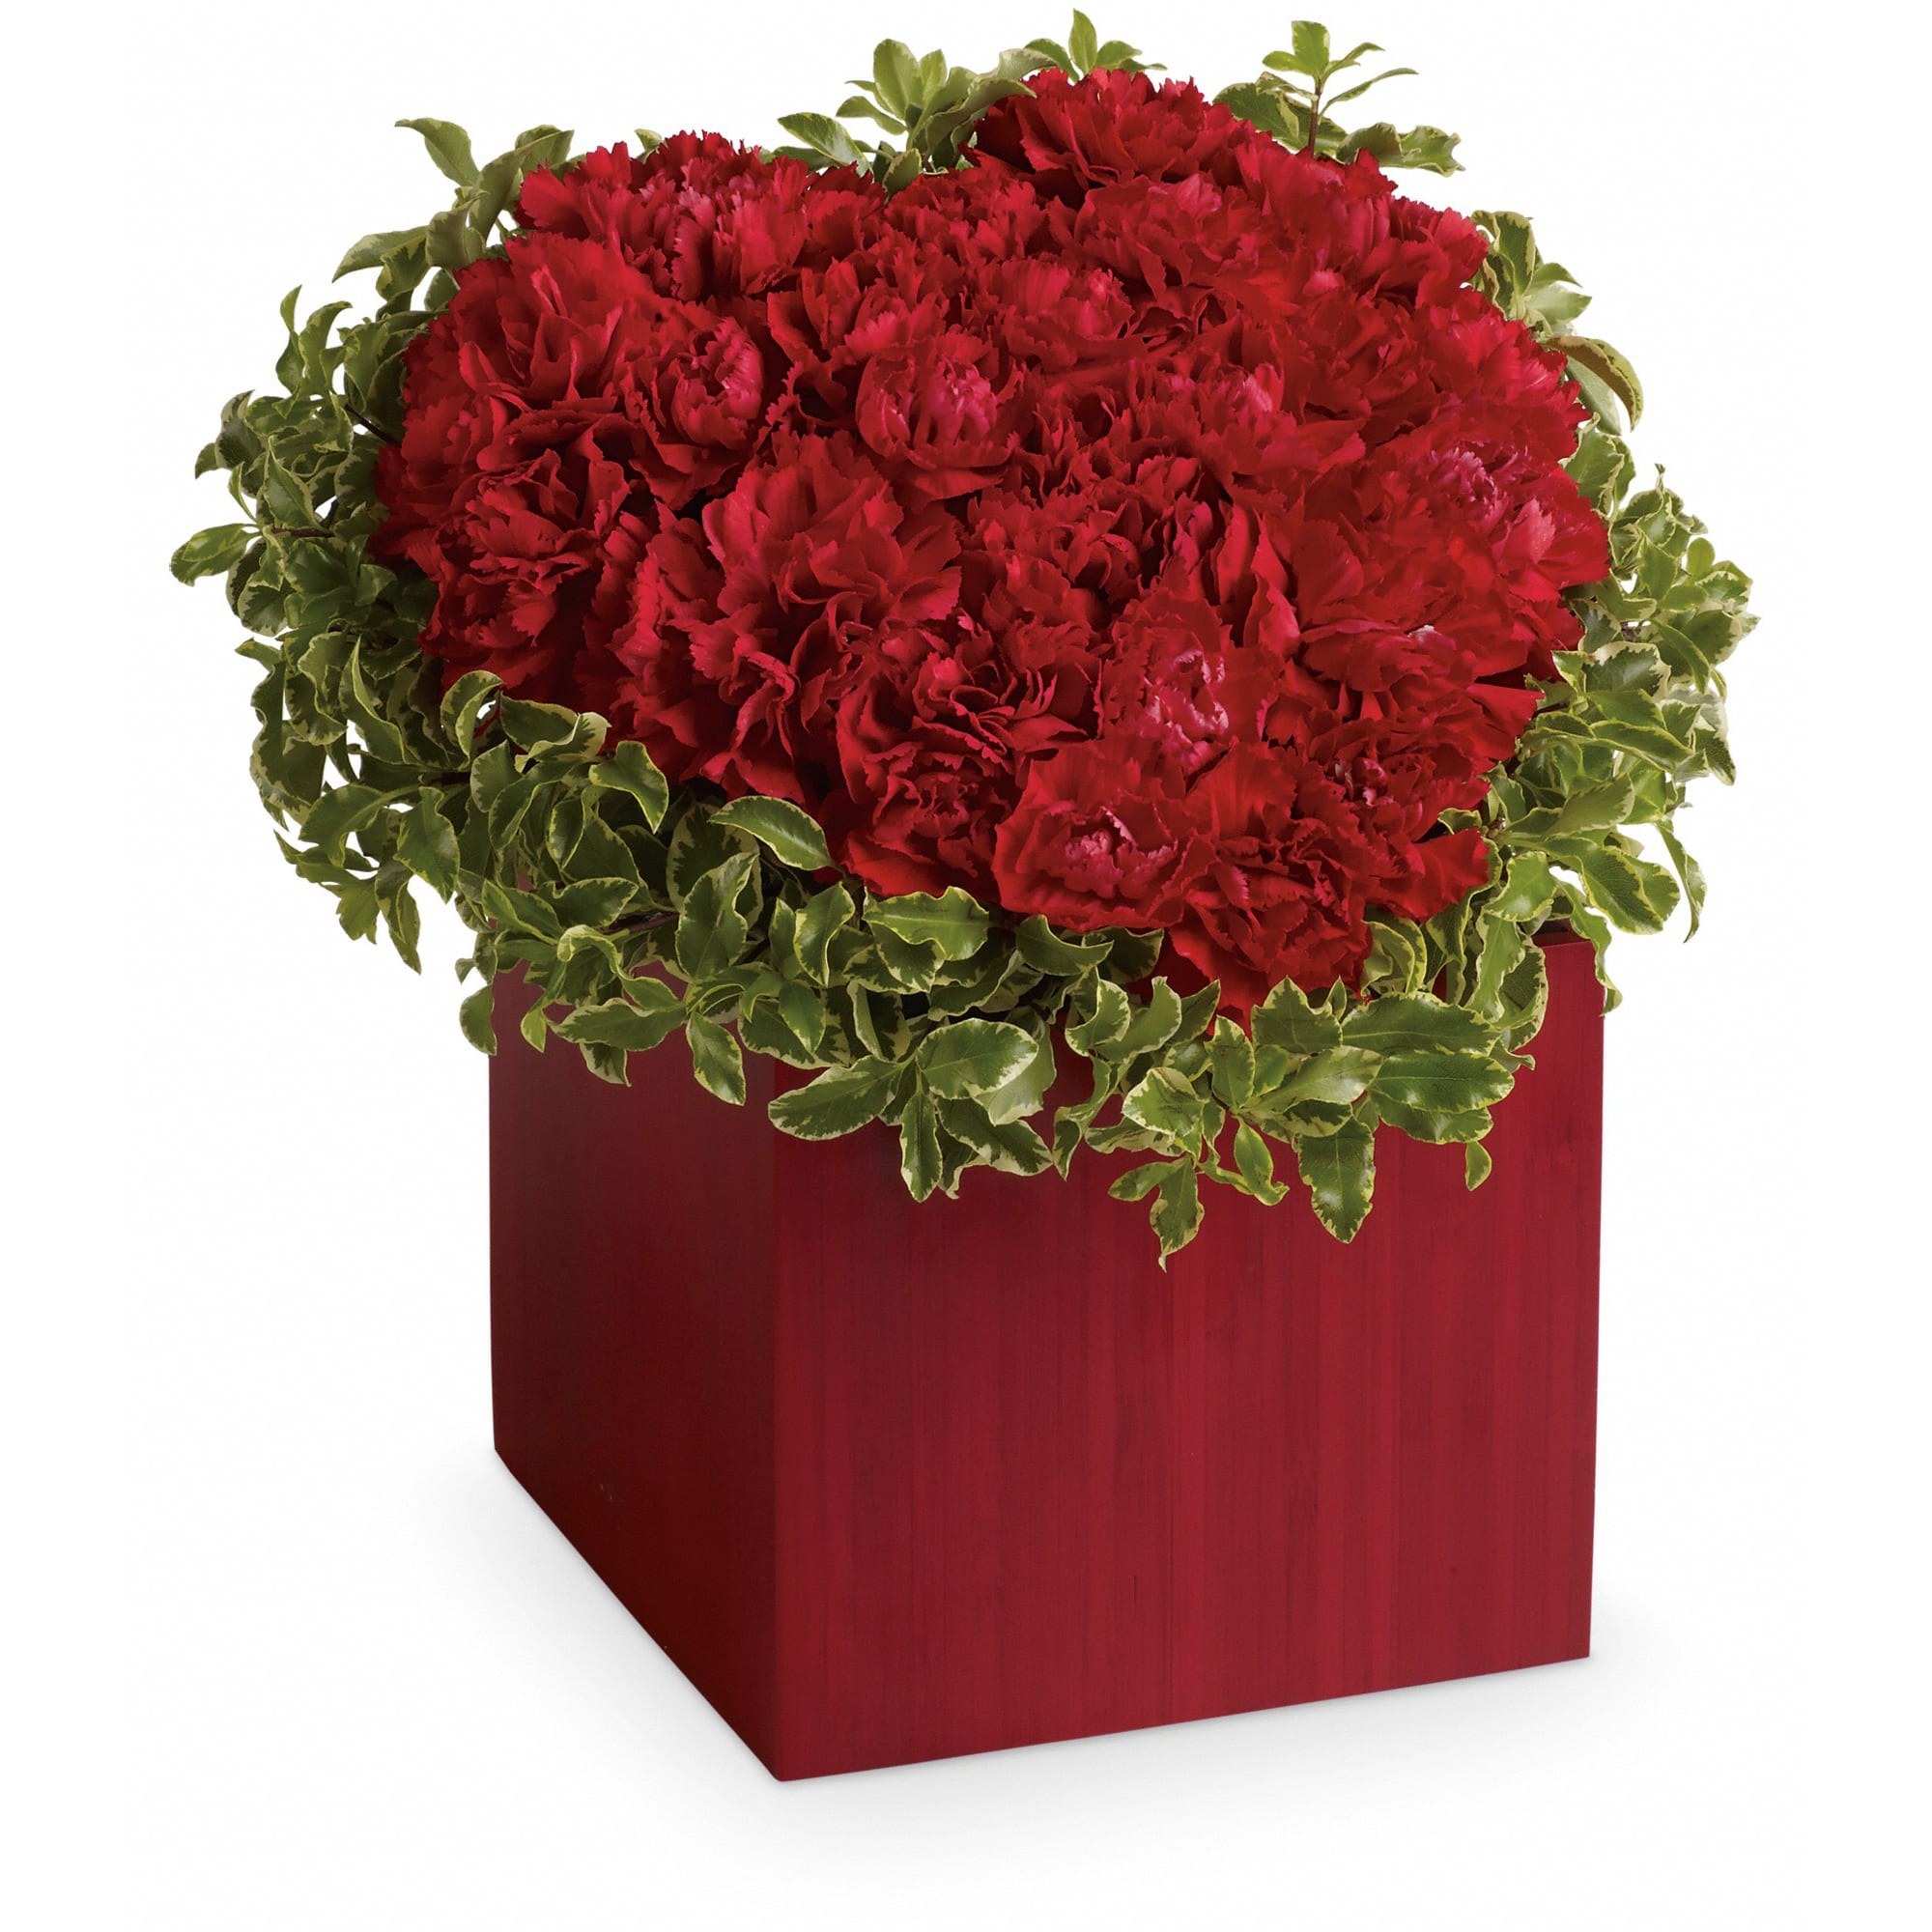 Hopelessly Devoted - When you're looking for a unique way to celebrate your devotion, think inside the box with this charming heart-shaped mix of carnations and greens arranged in a rich red bamboo cube.